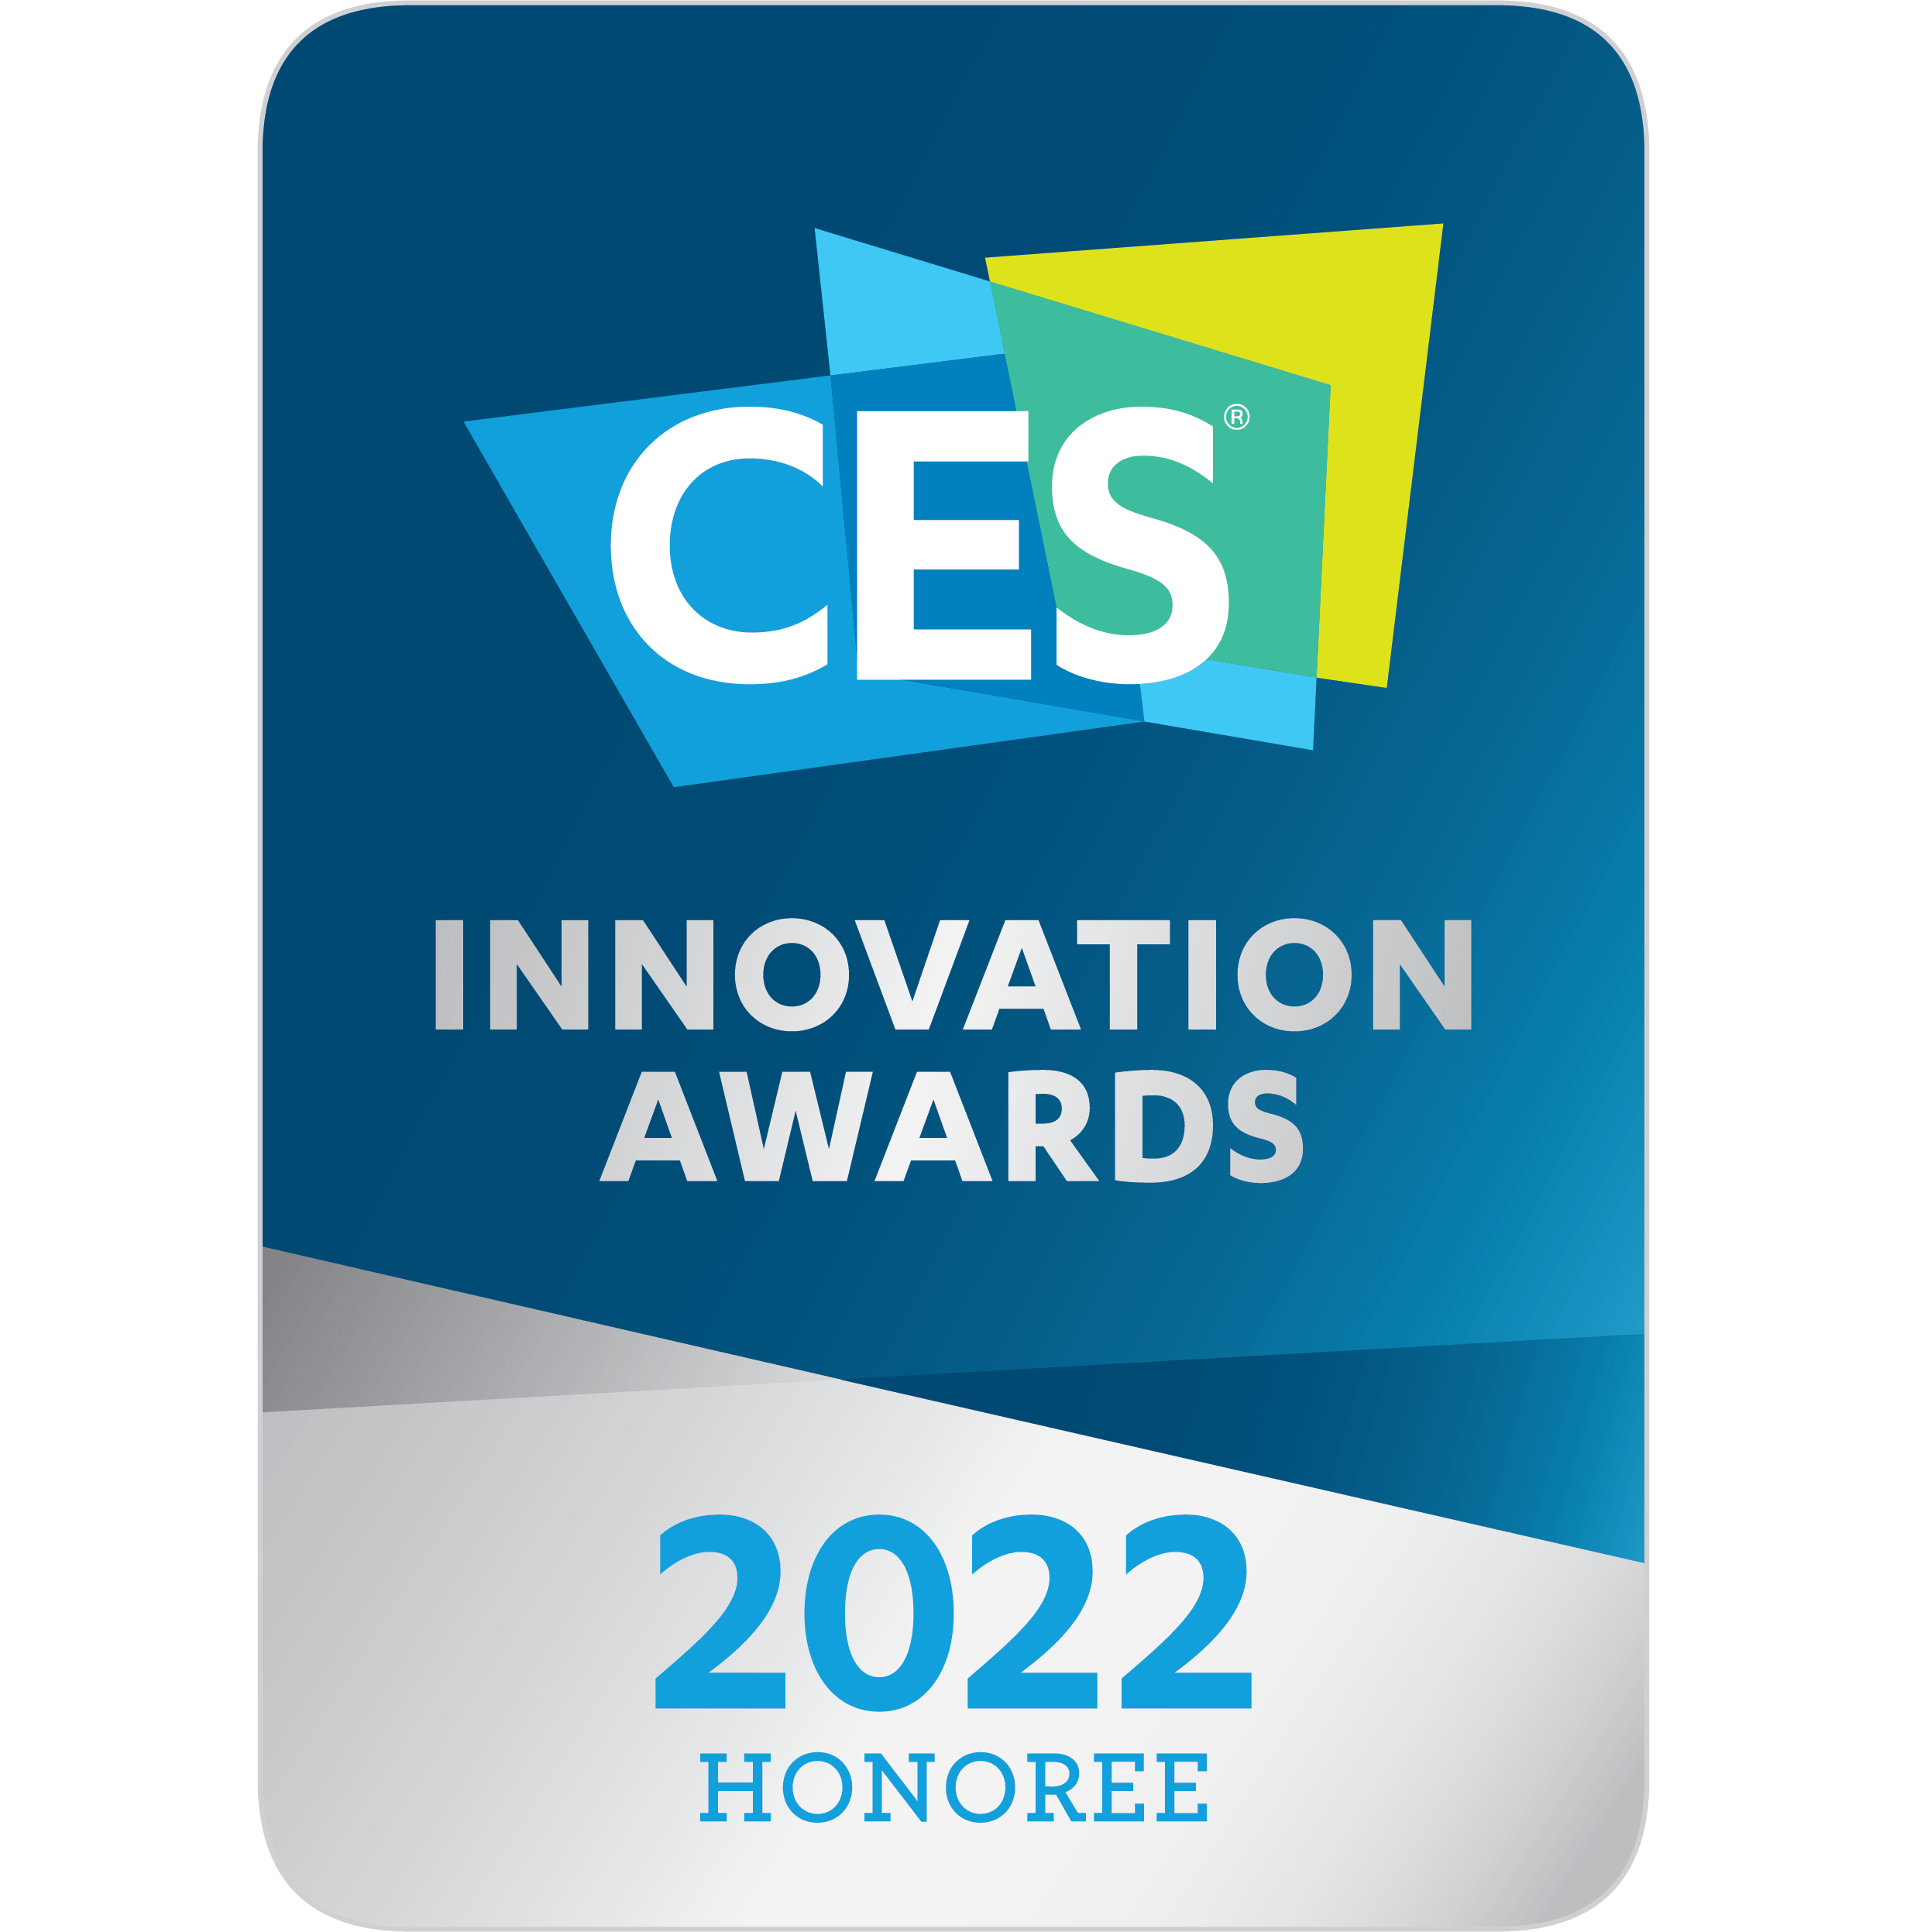 Digi TX64 5G Is an Honoree in CES 2022 Innovation Awards